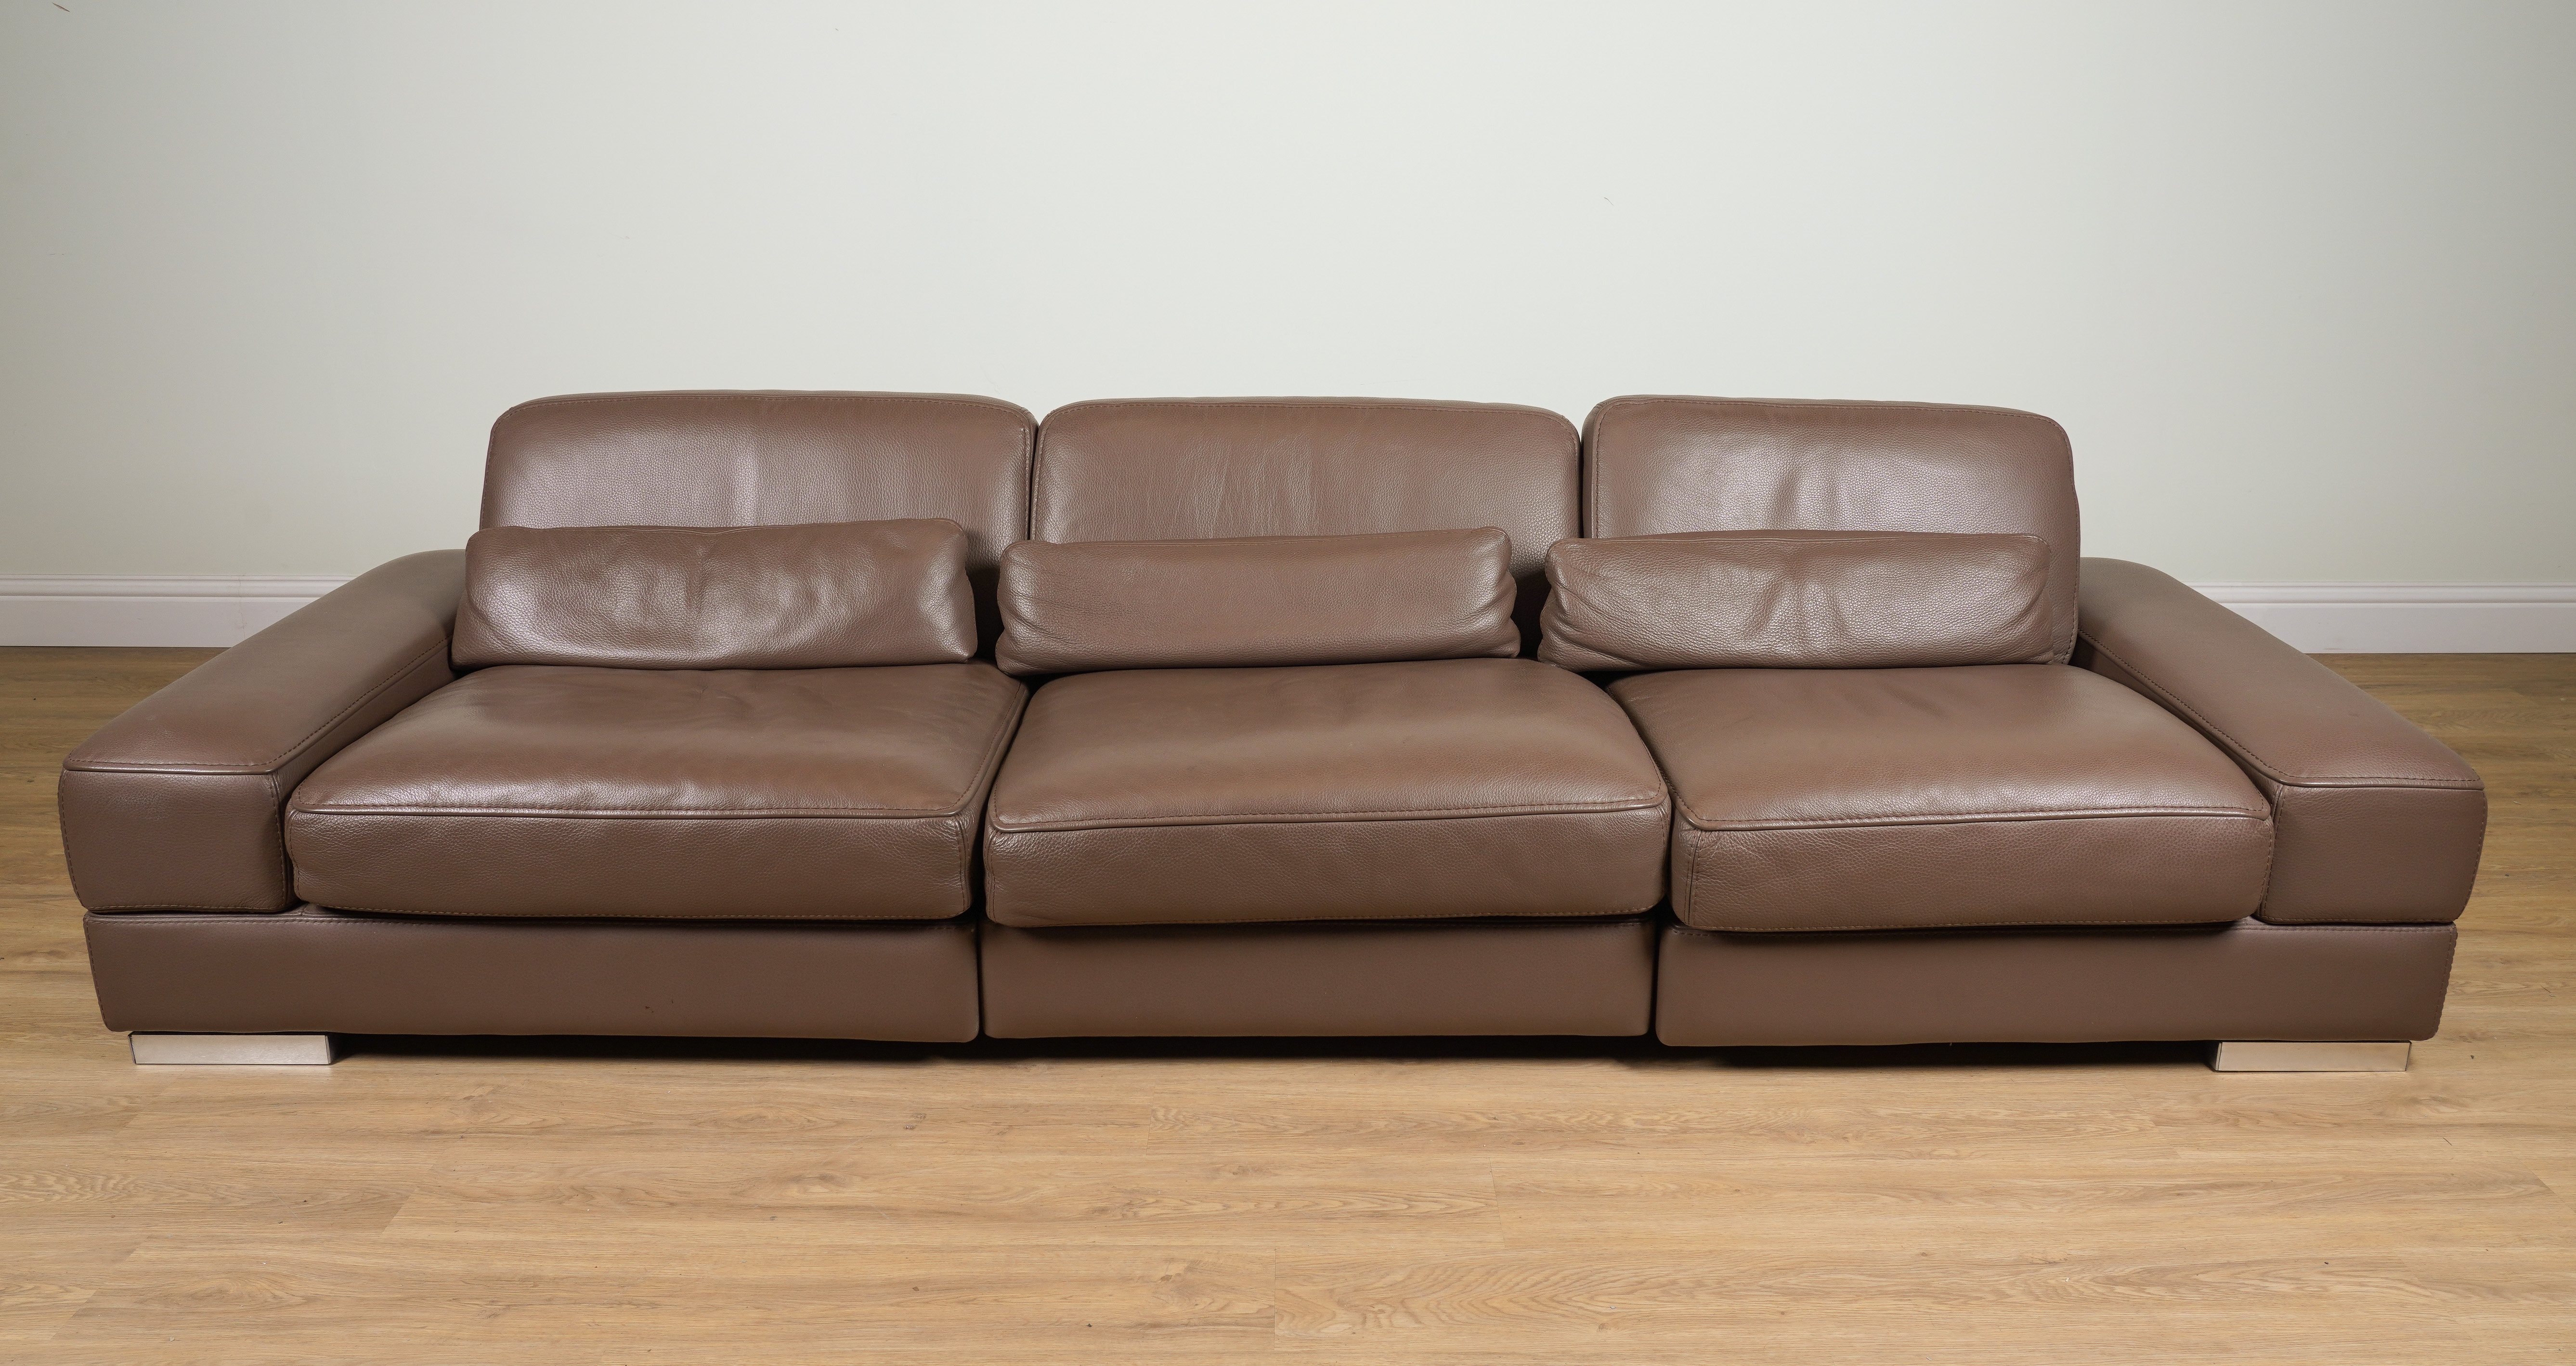 ROCHE BOBOIS; A BROWN LEATHER UPHOLSTERED